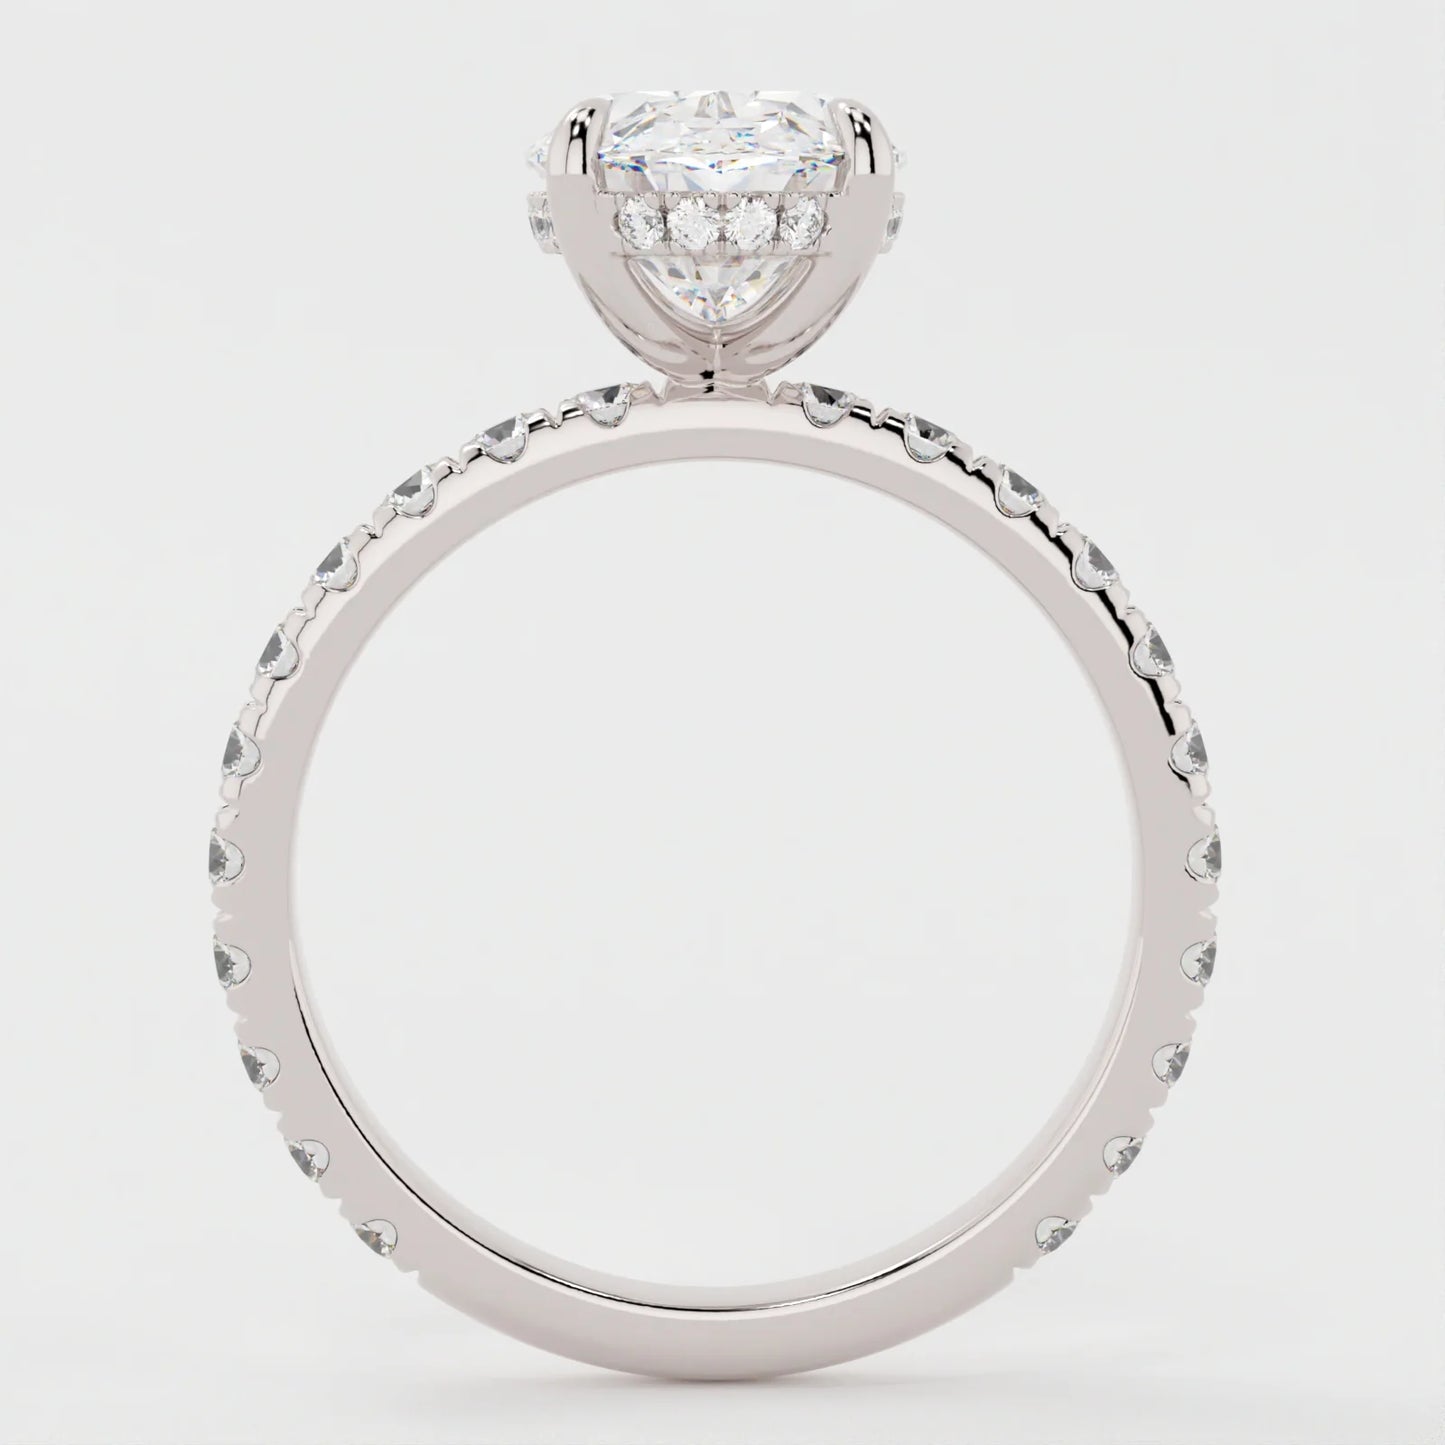 3 Carat Oval Cut Moissanite Diamond Engagement Ring with Pavé Band